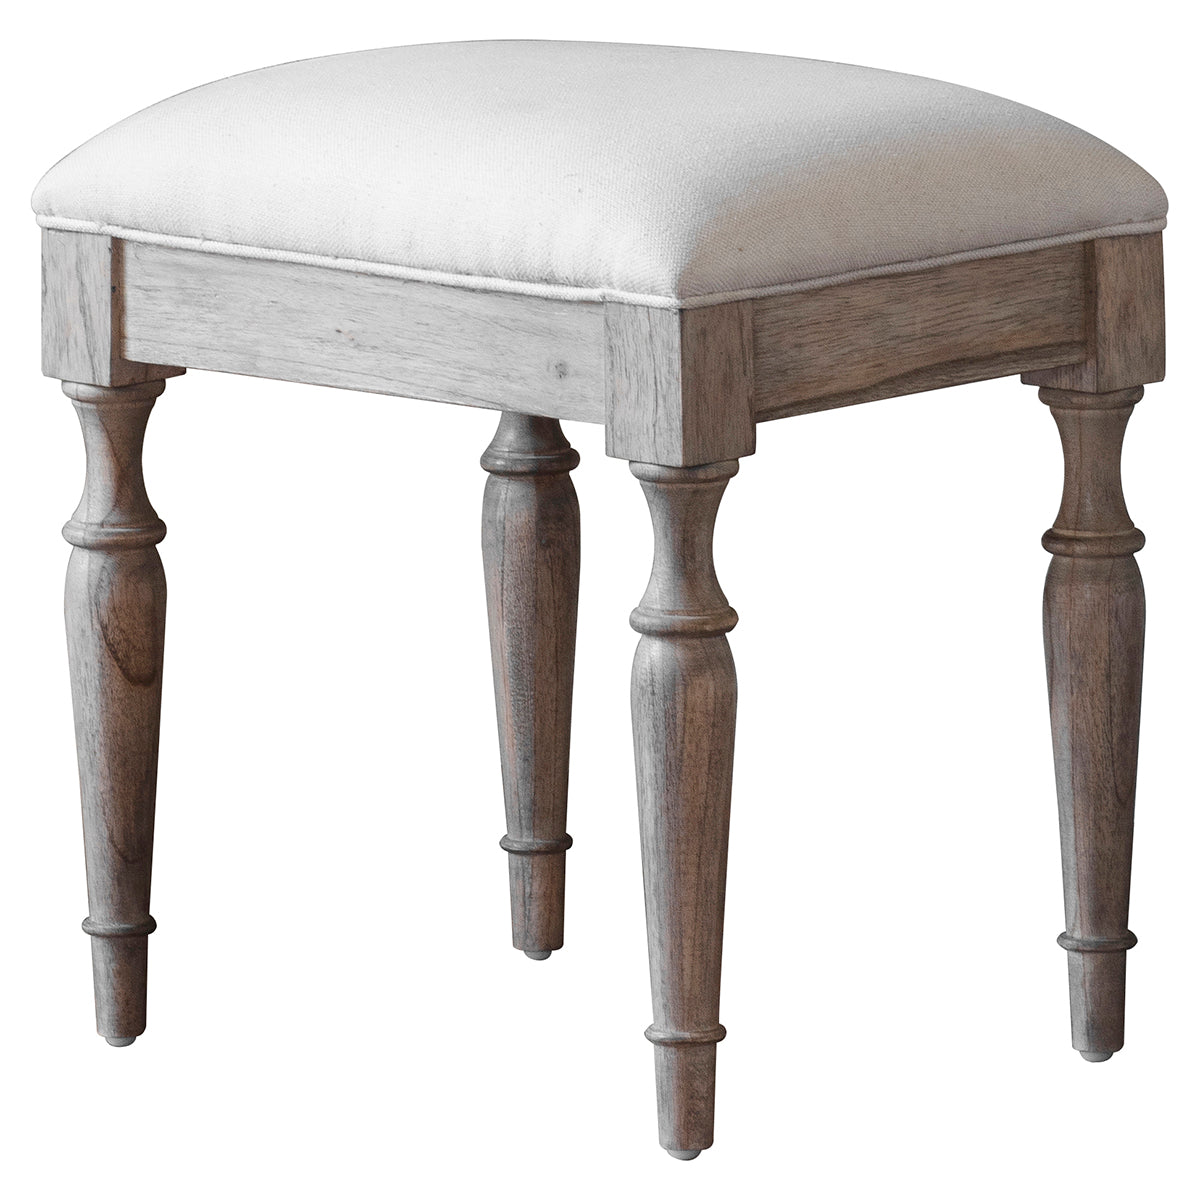 A Belsford Dressing Stool 440x340x450mm perfect for home furniture and interior decor.